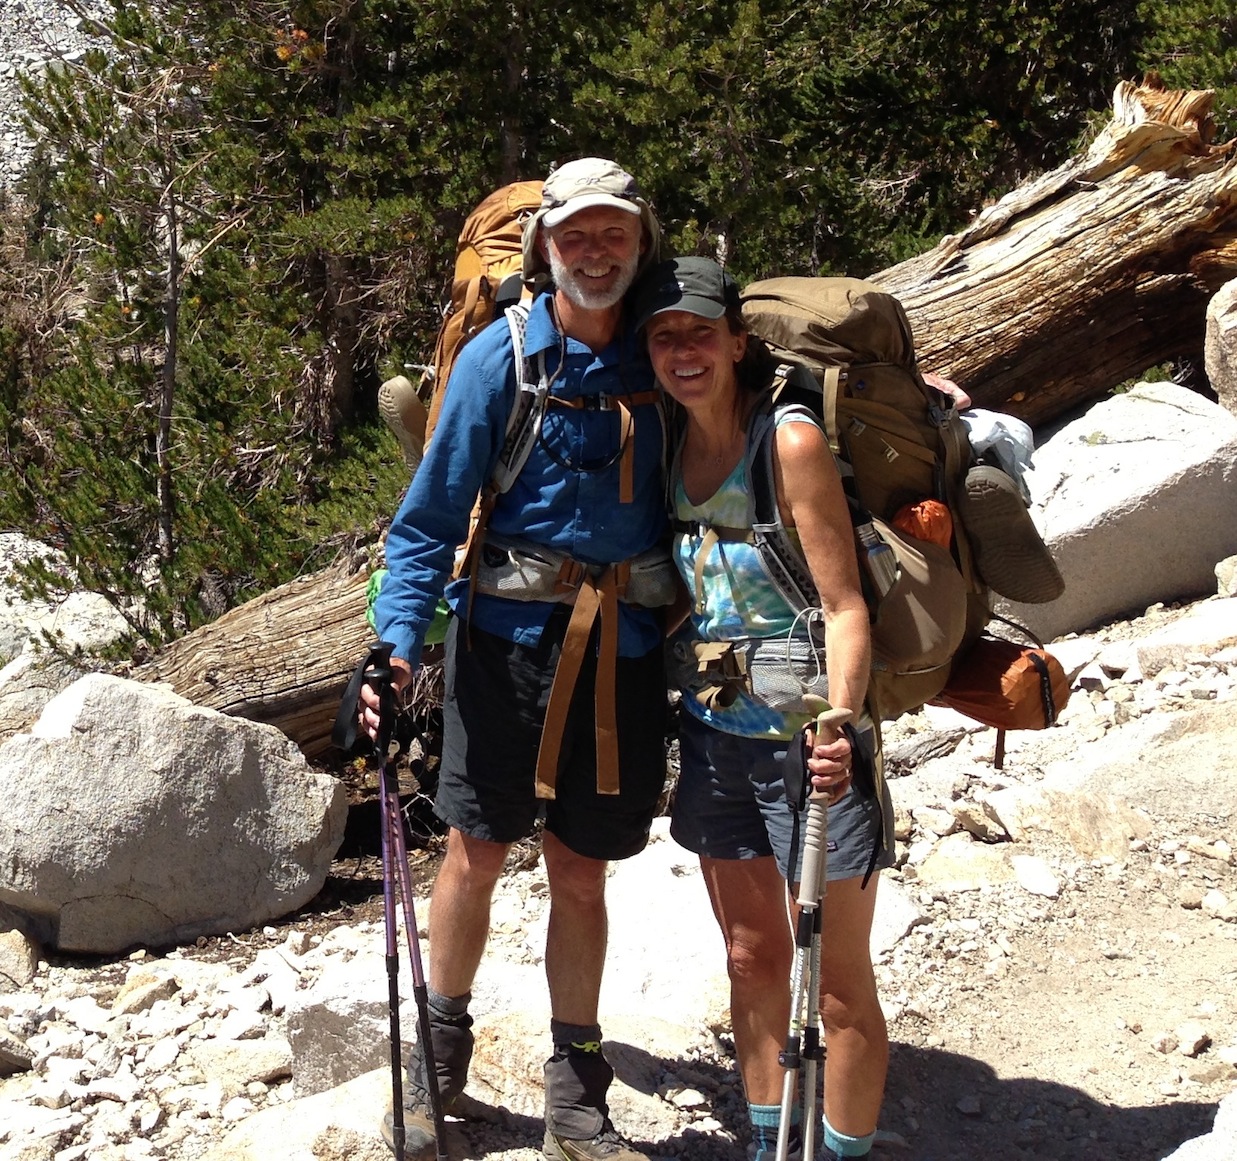 Oregon JMT hikers Craig and Noni are loving the trail after a few days at the Base Camp